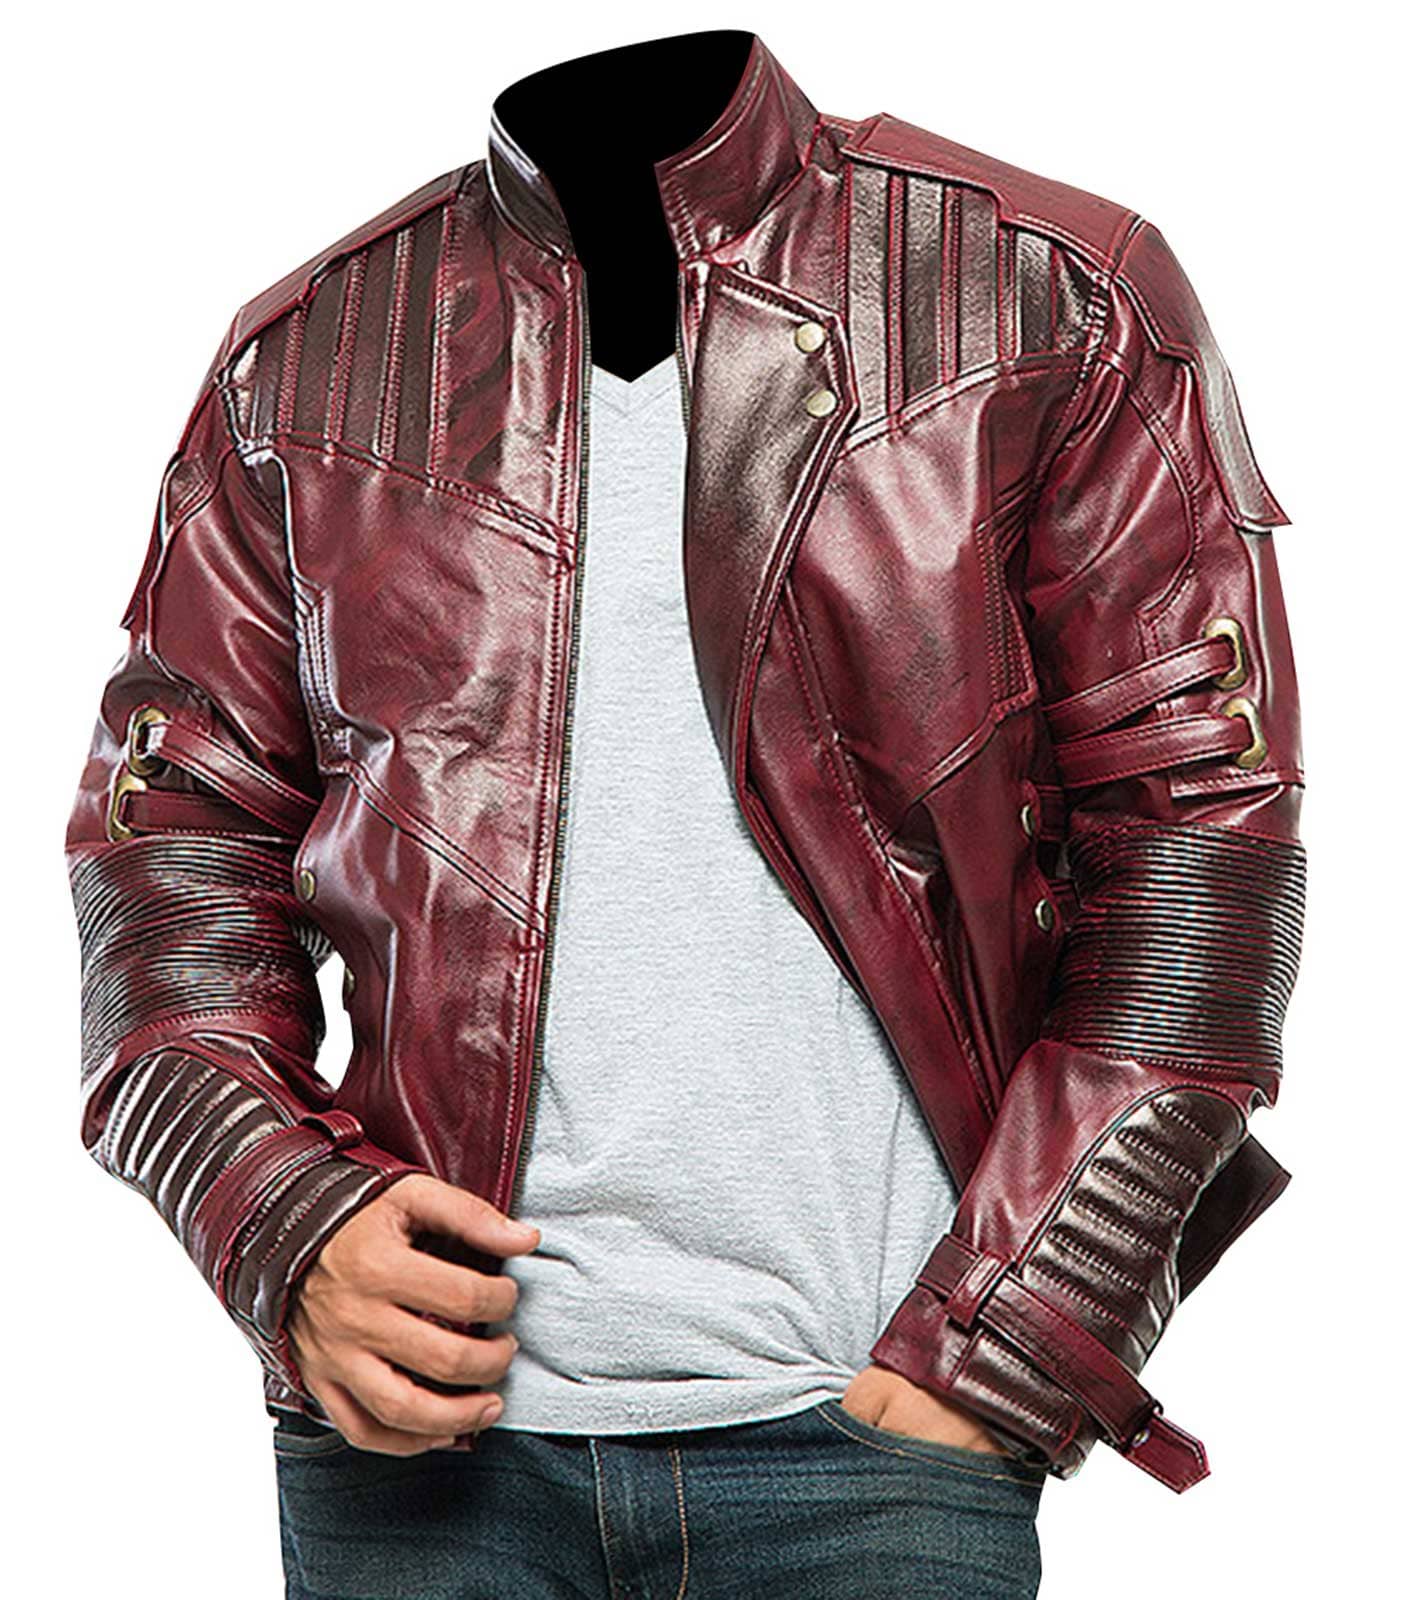 Guardians of the Galaxy 2 Star Lord Leather Jacket